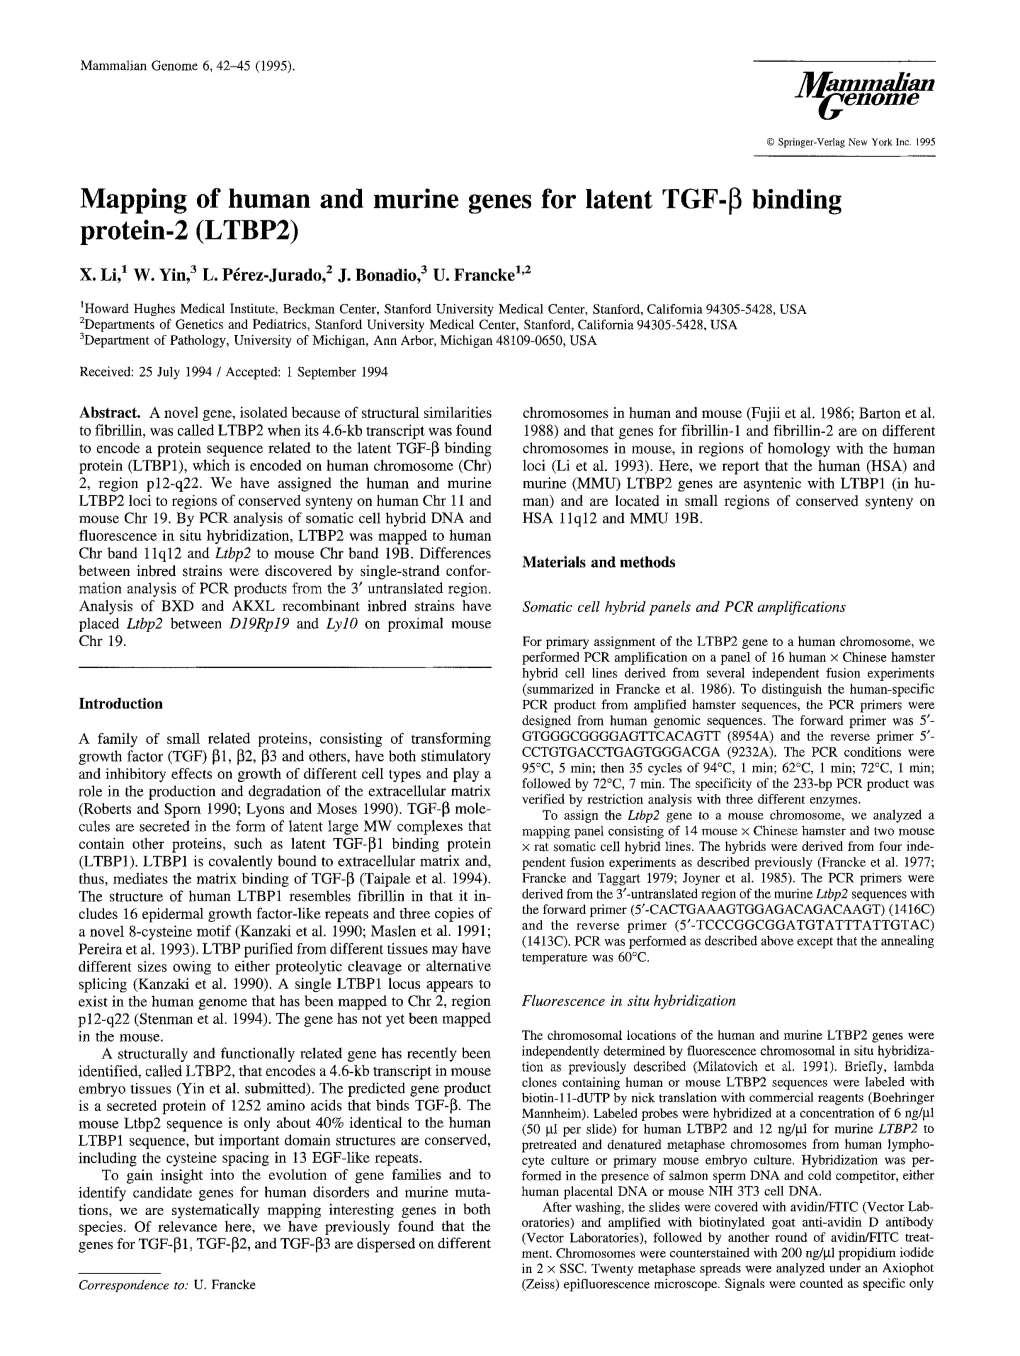 Mapping of Human and Murine Genes for Latent TGF-&#X03b2